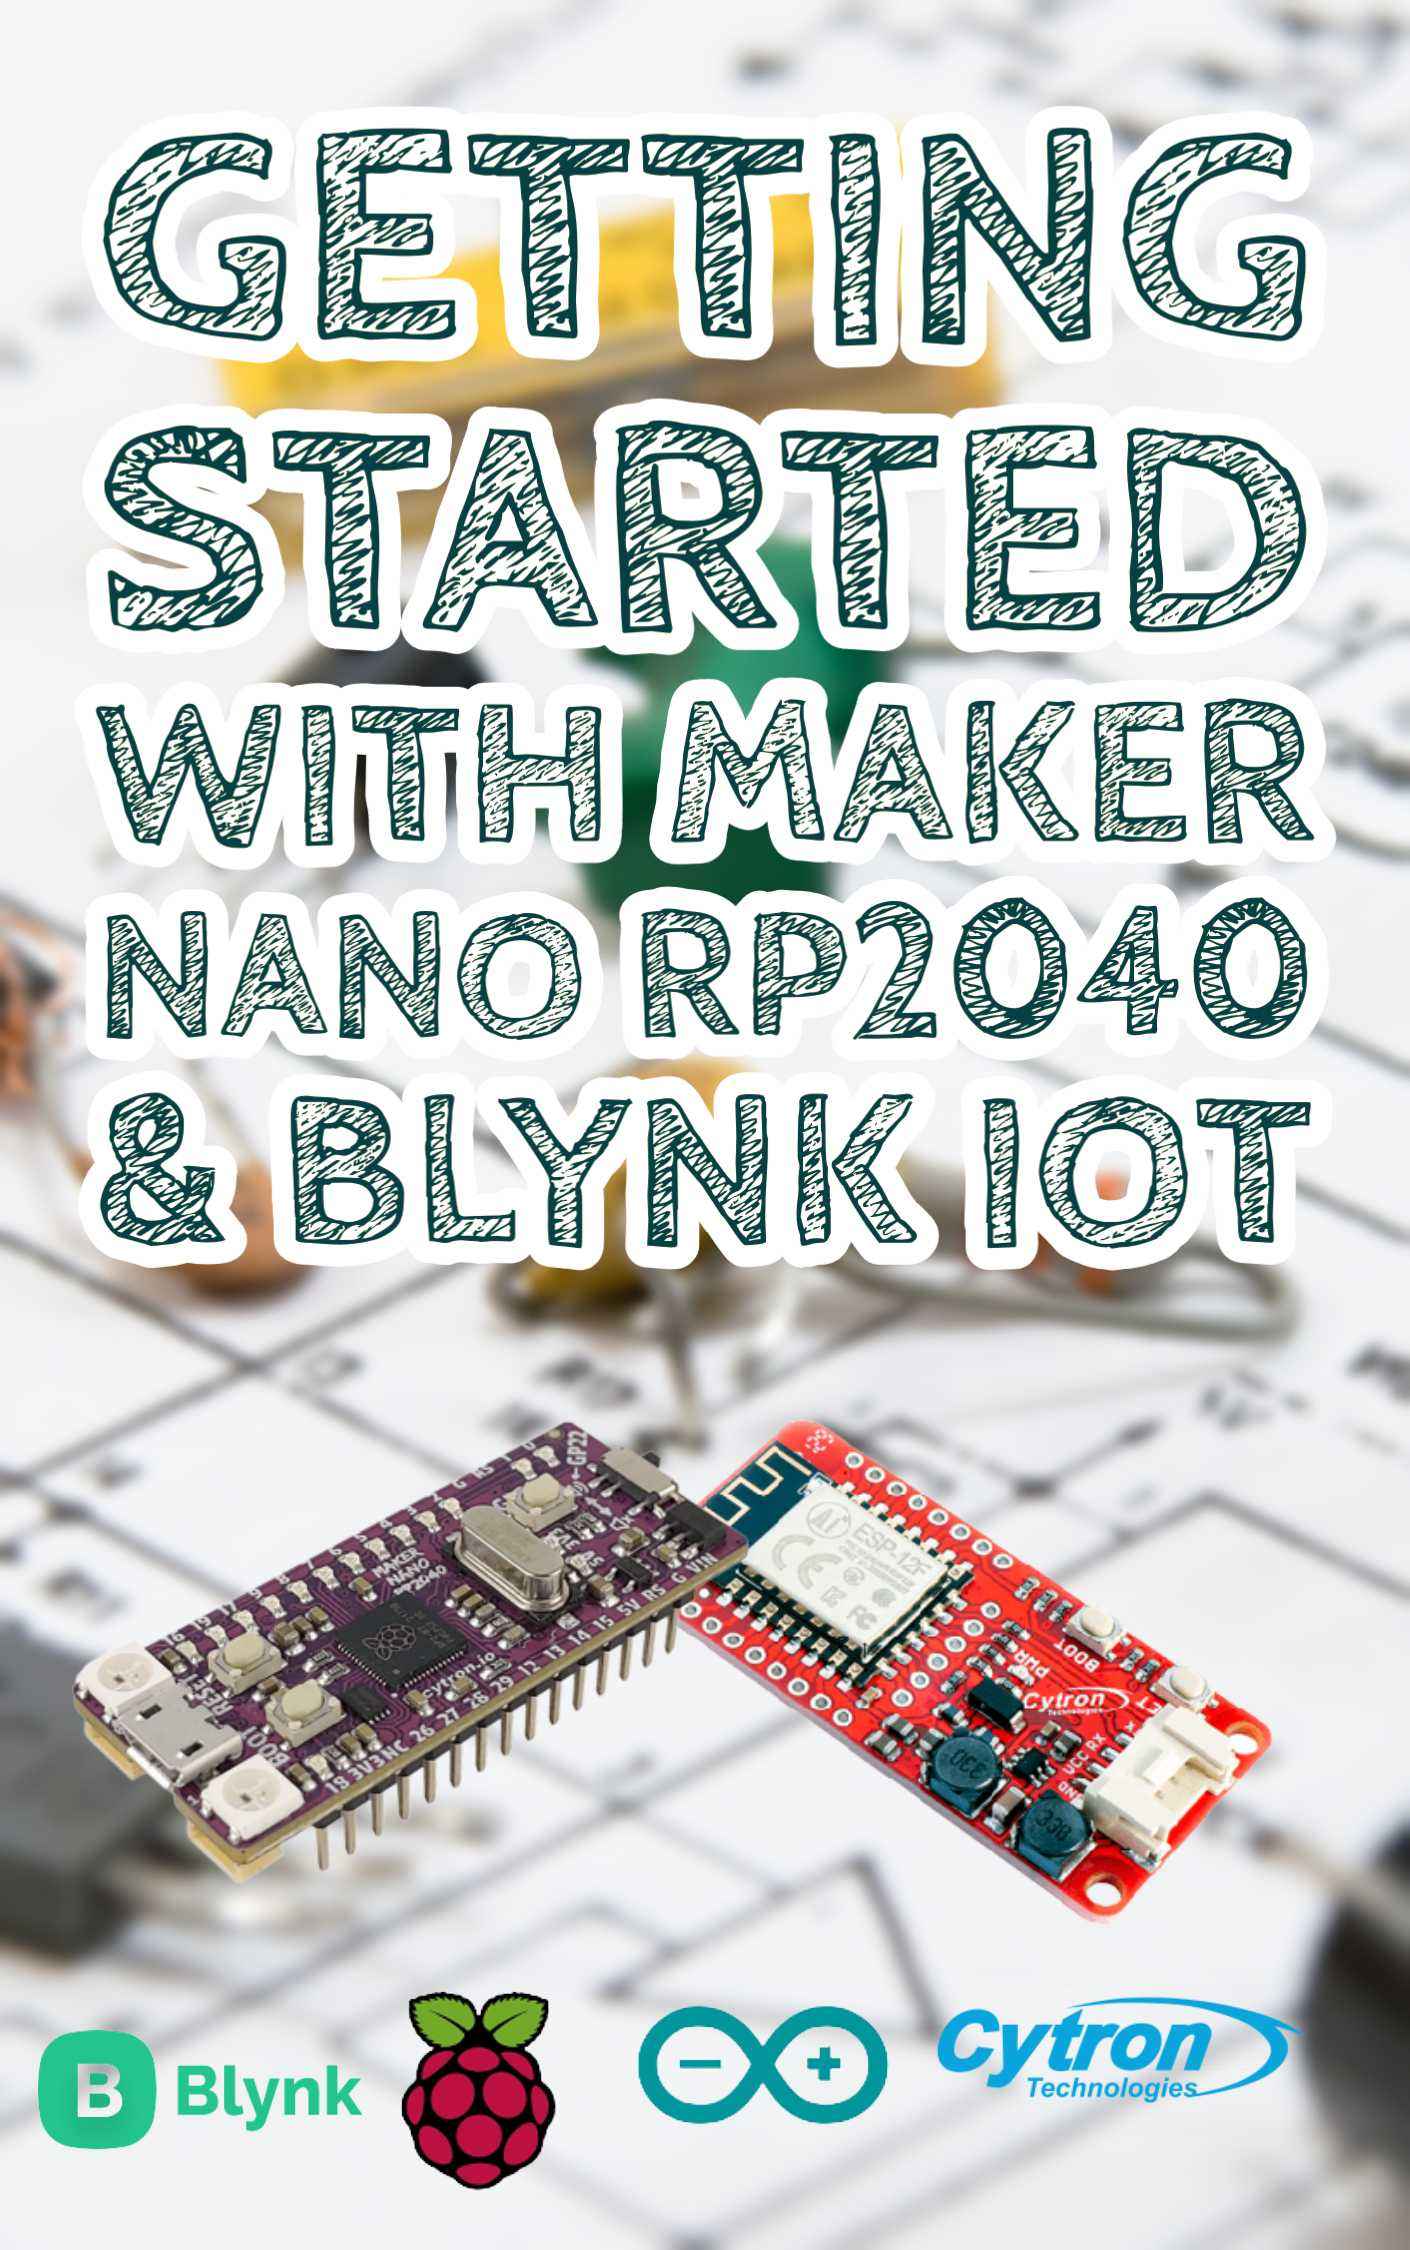 Getting Started With Maker Nano RP2040 & Blynk IoT